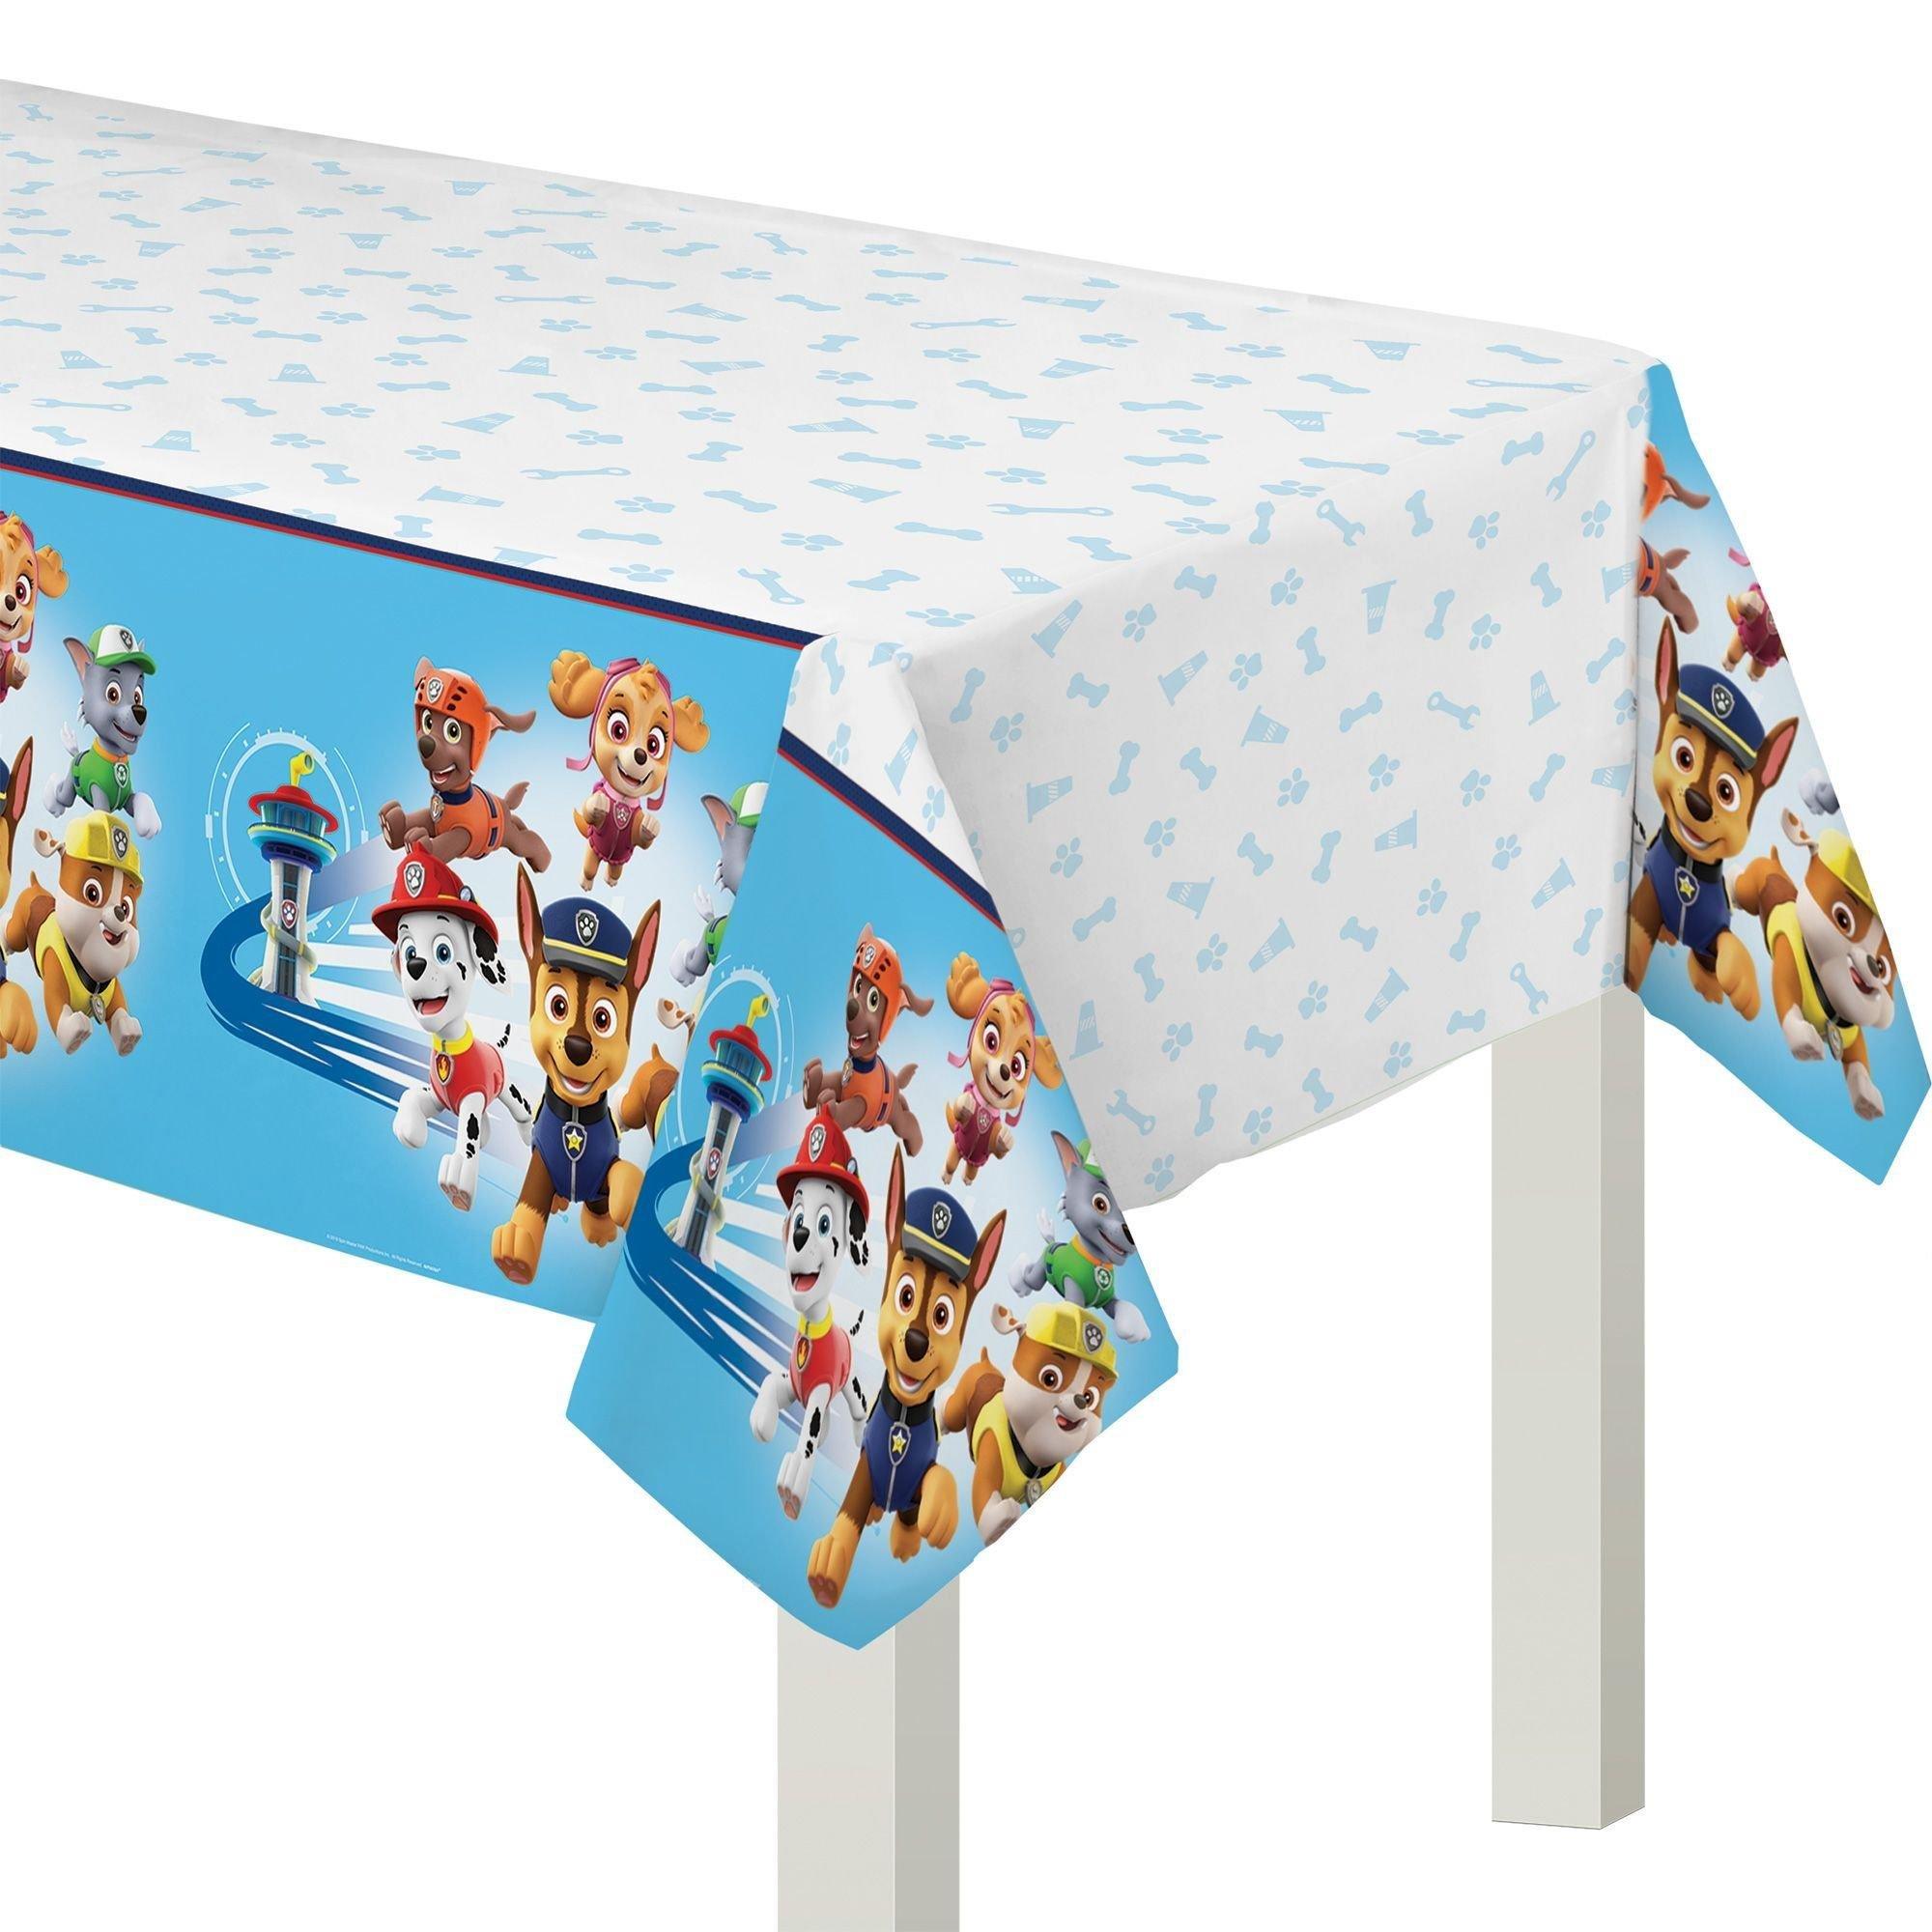 PAW Patrol Party Supplies Pack for 8 Guests - Kit Includes Plates, Napkins & Table Cover